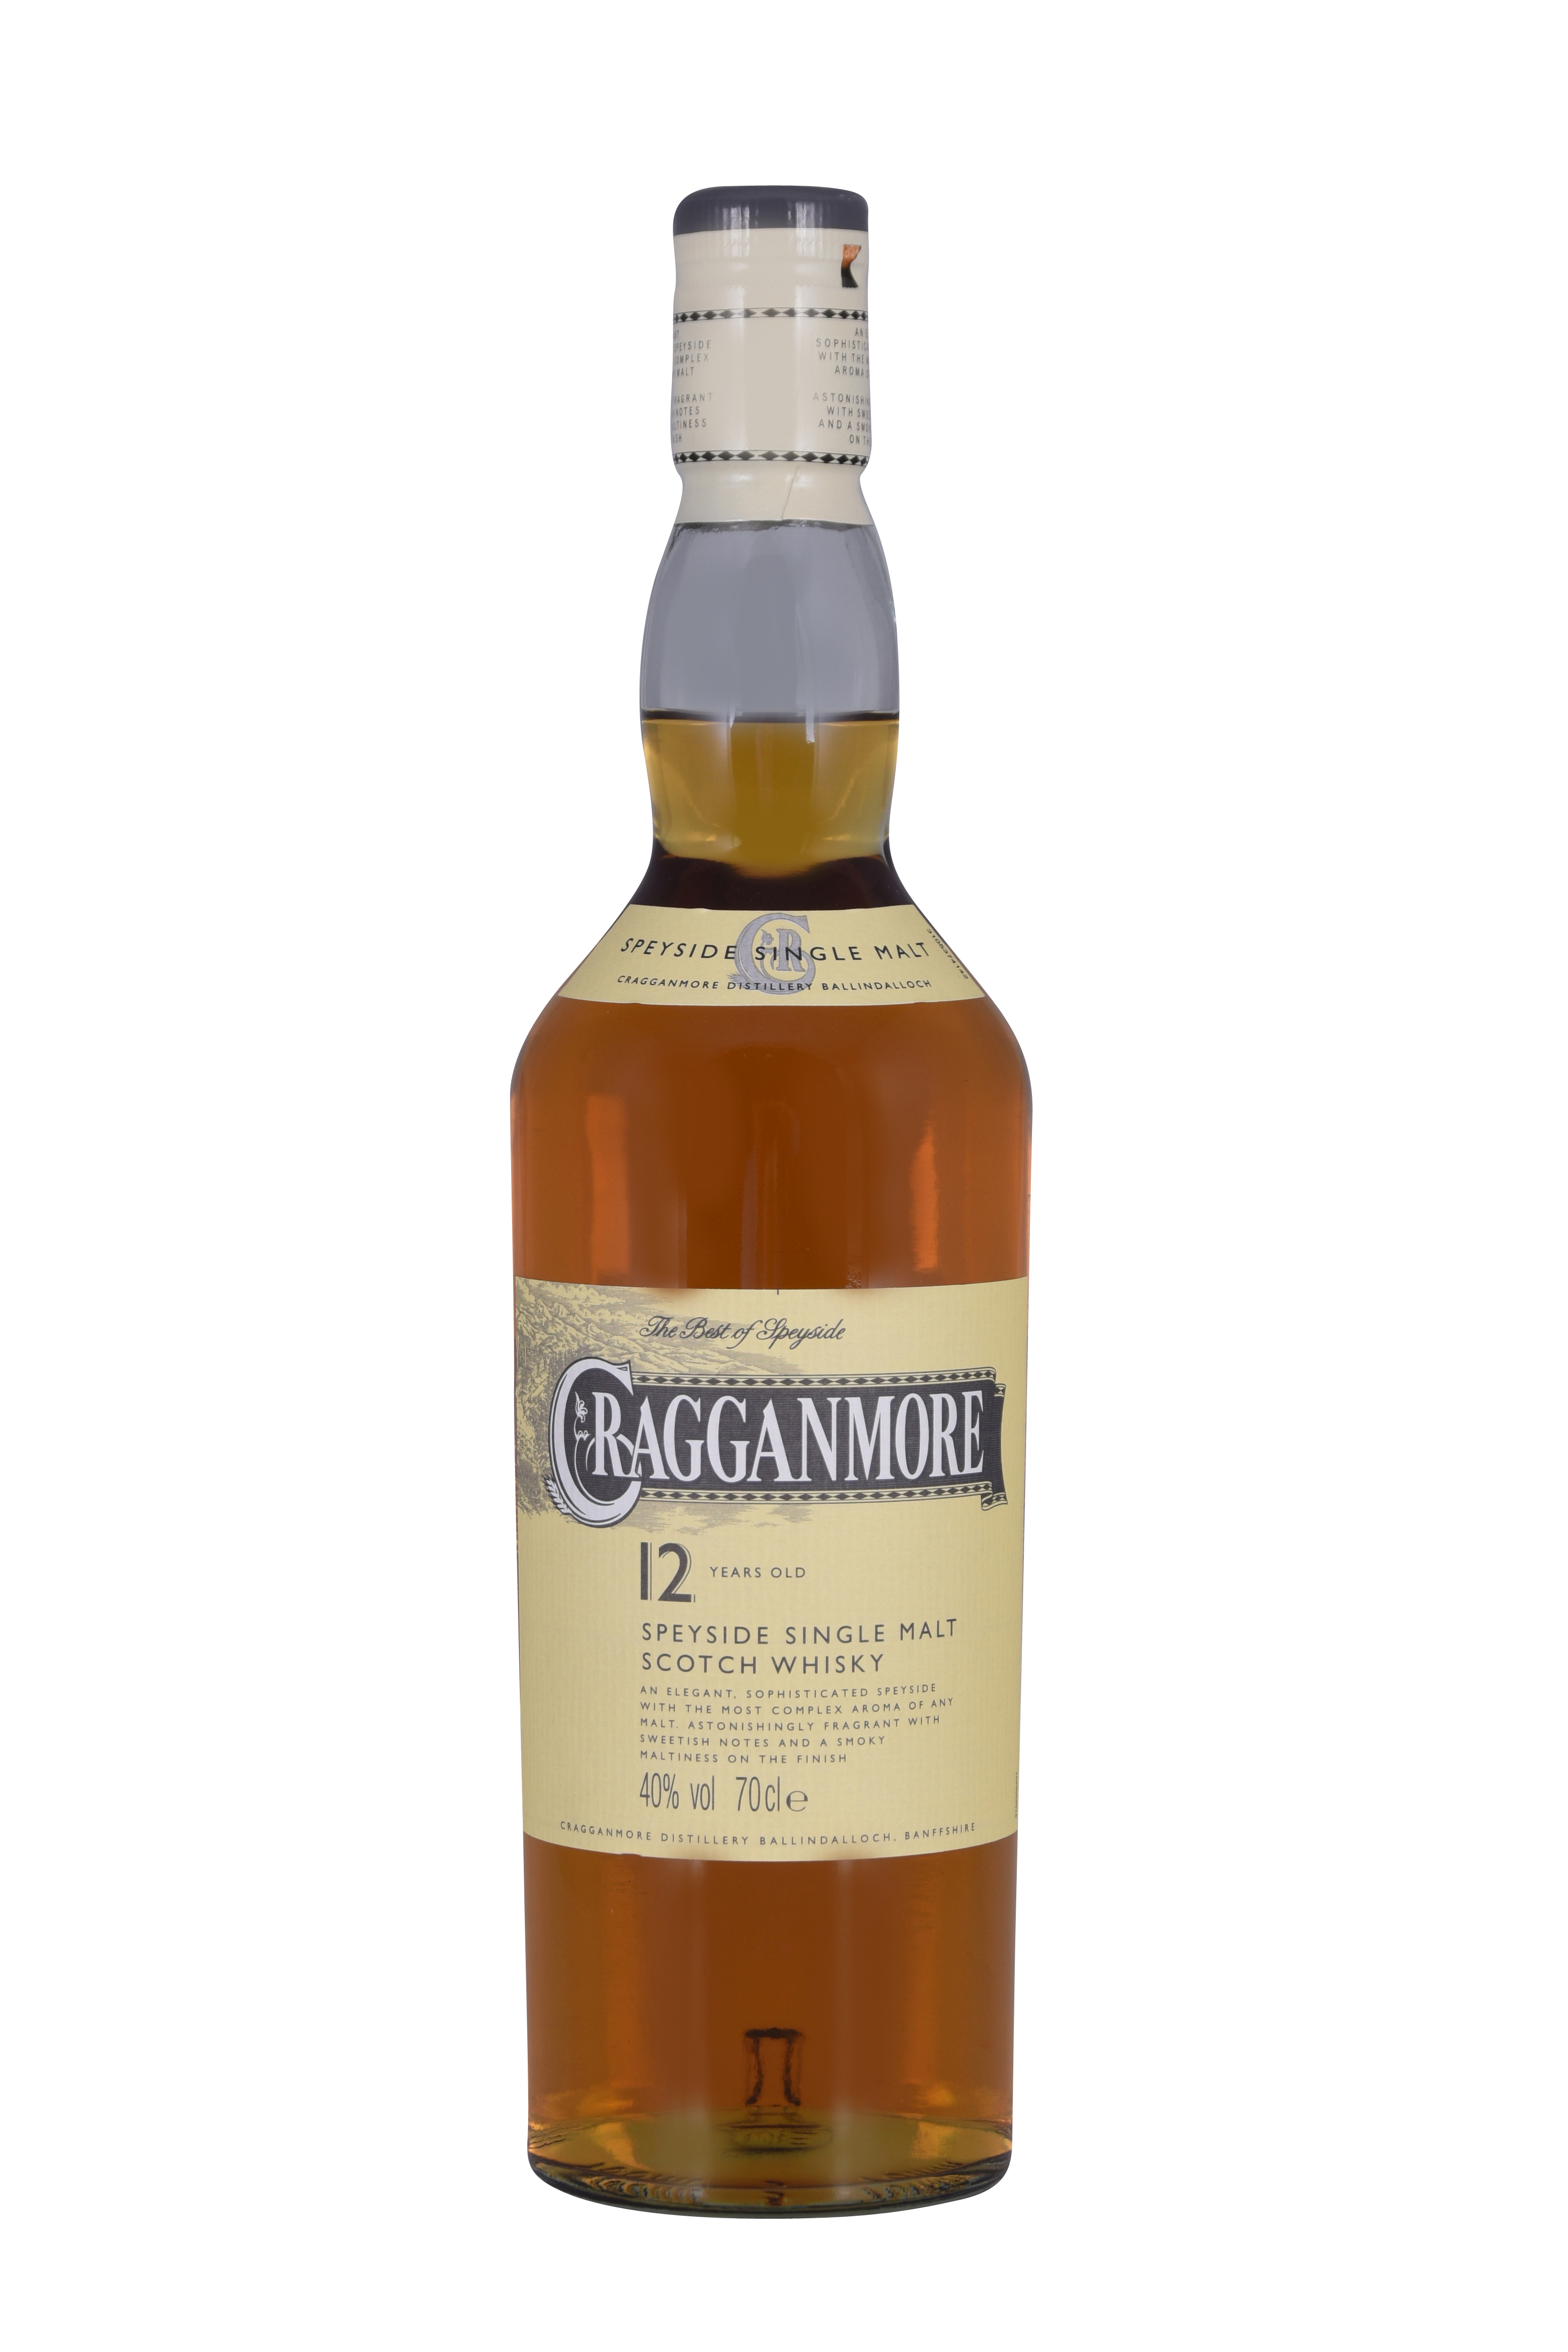 48334 Cragganmore malt whisky 12 years 1x0,70 ltr